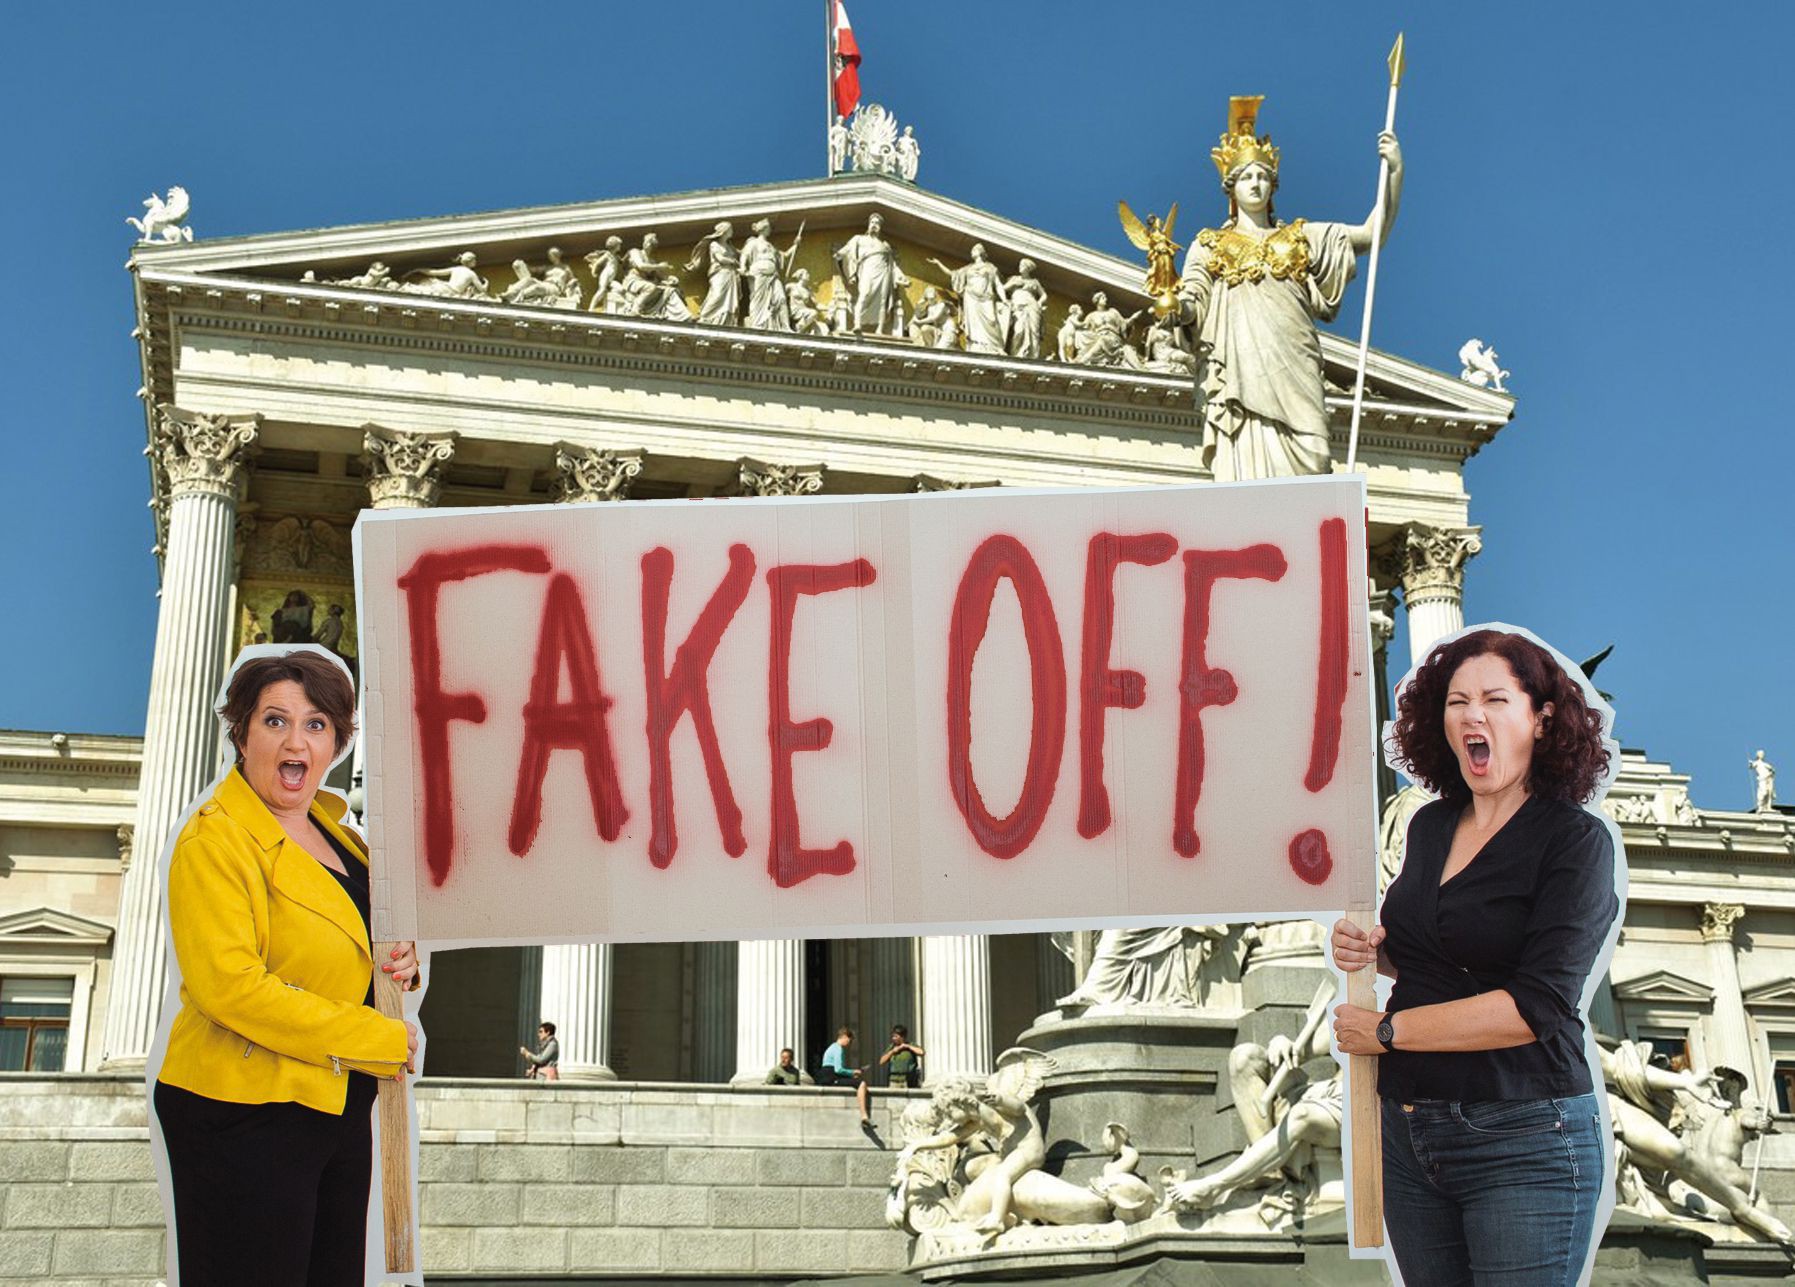 tag_fake_off_parlament_c_helena_wimmer